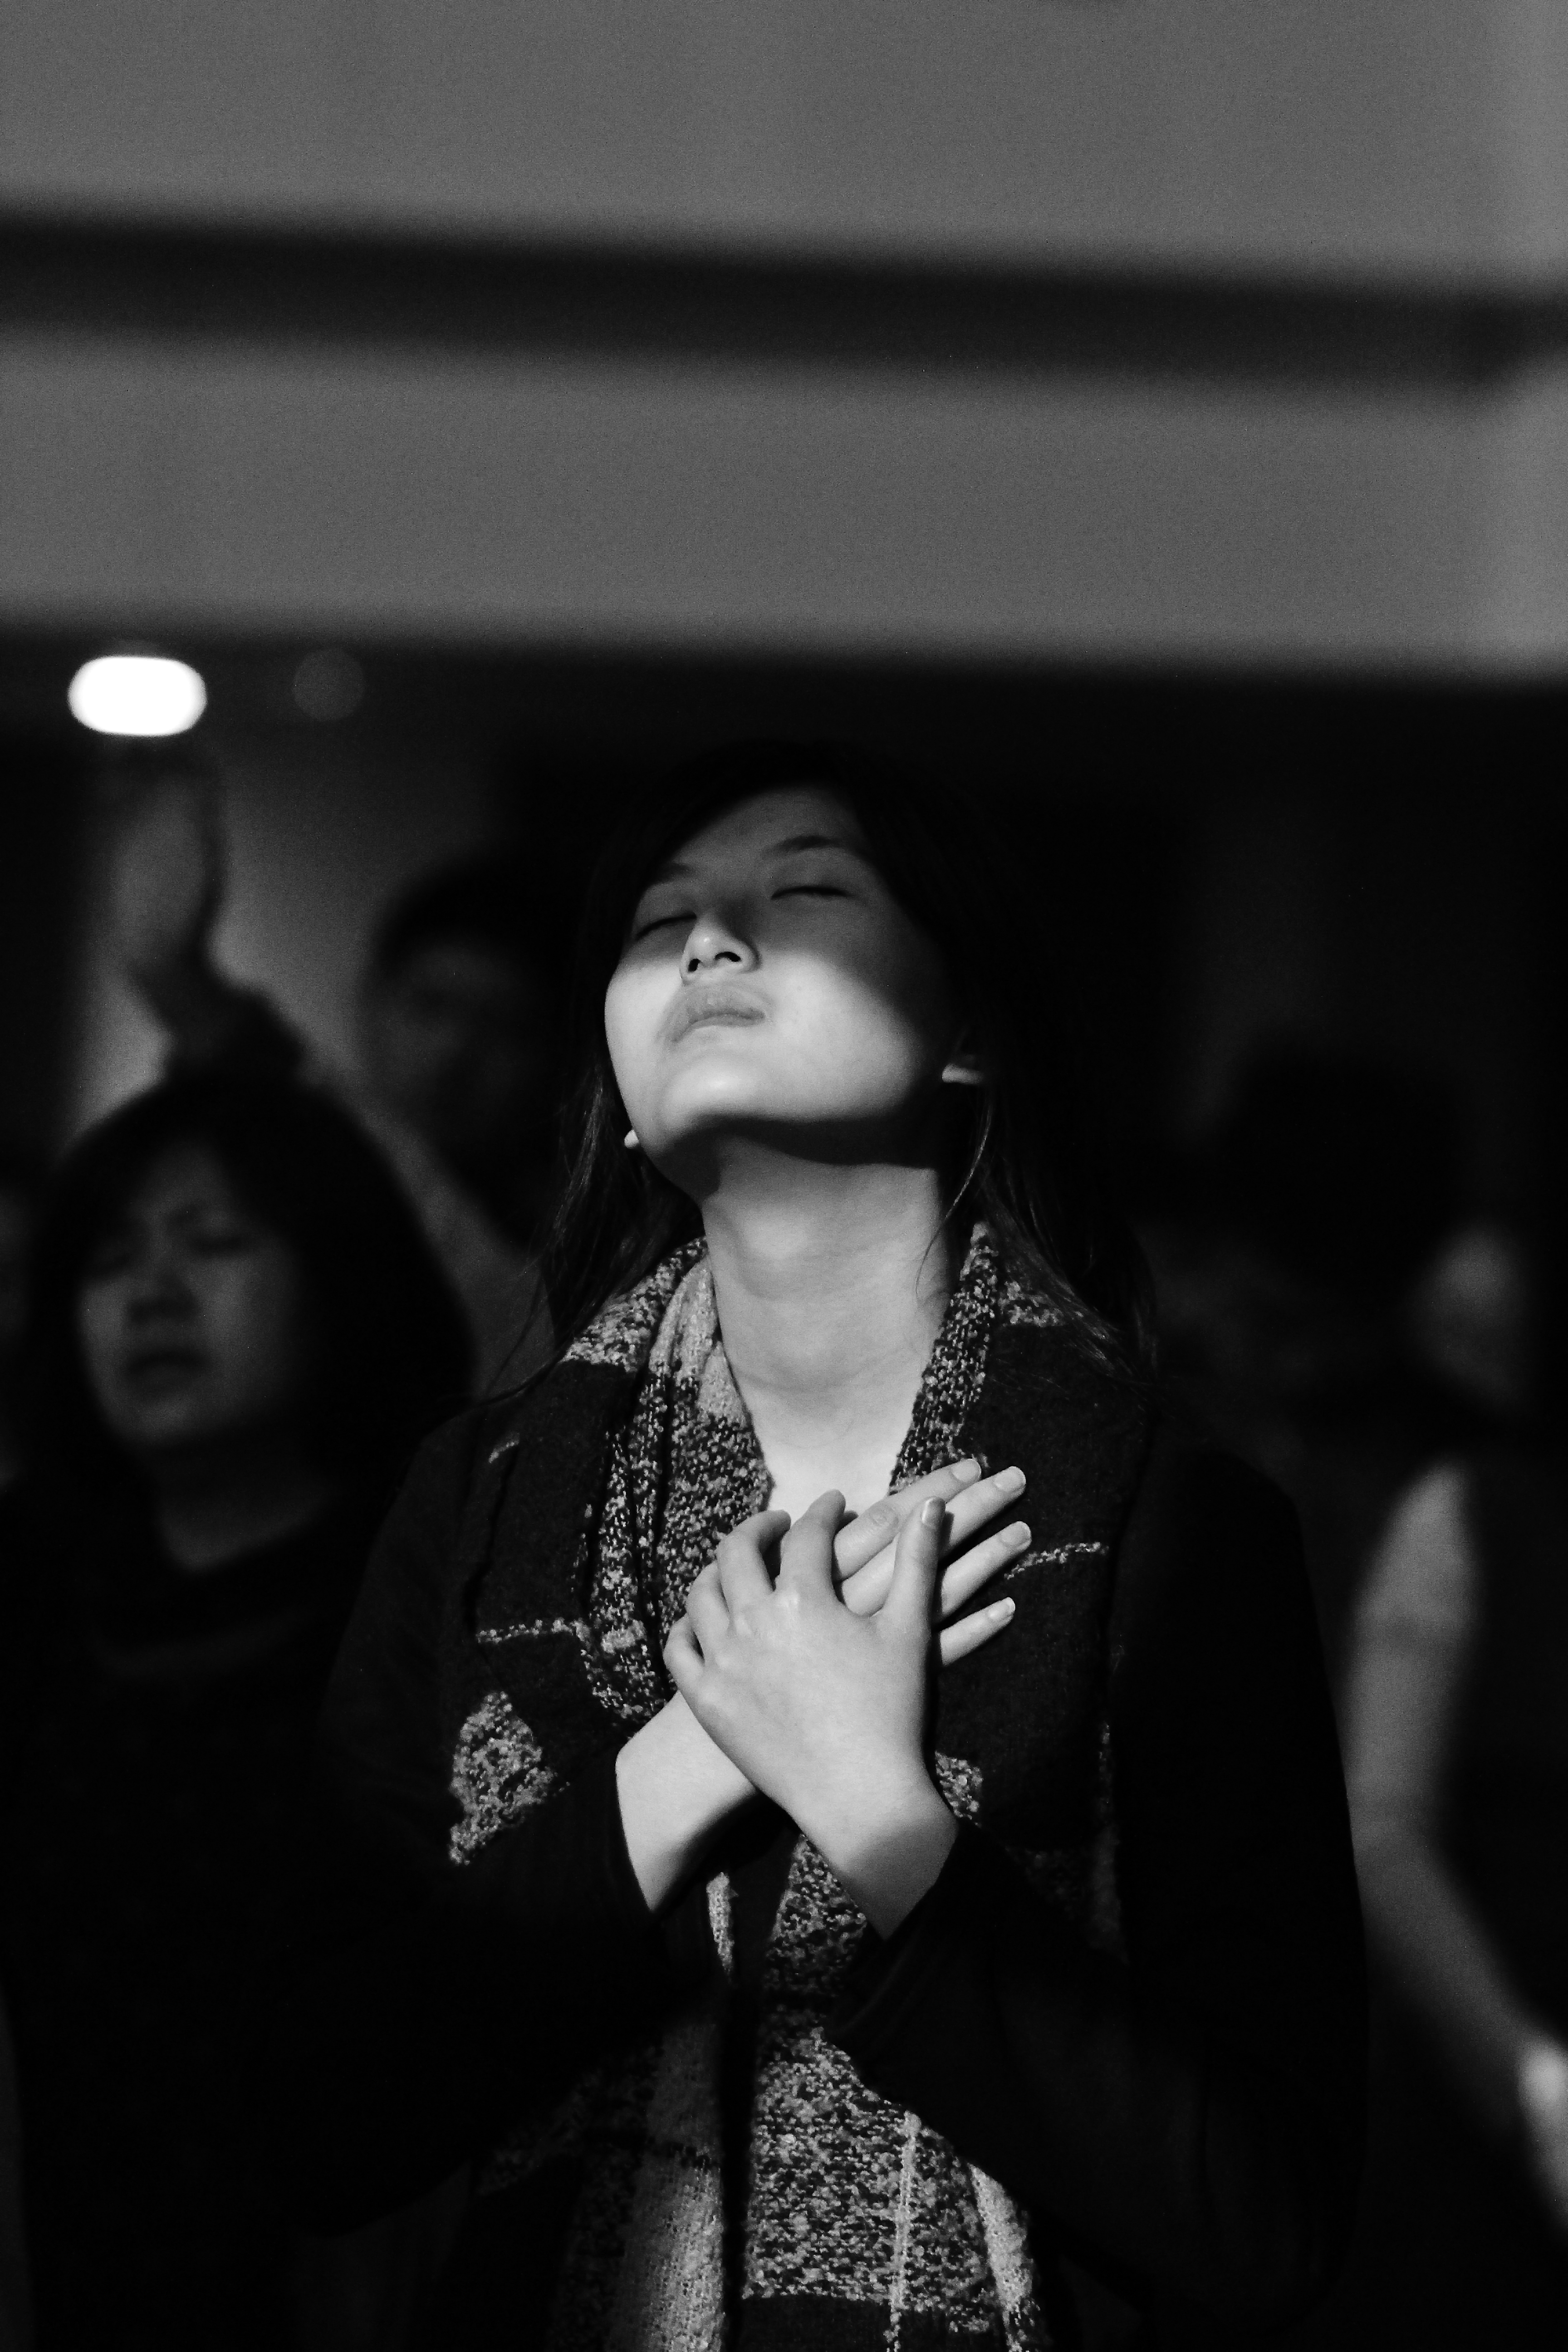 A woman in worship with closed eyes and hands over her heart